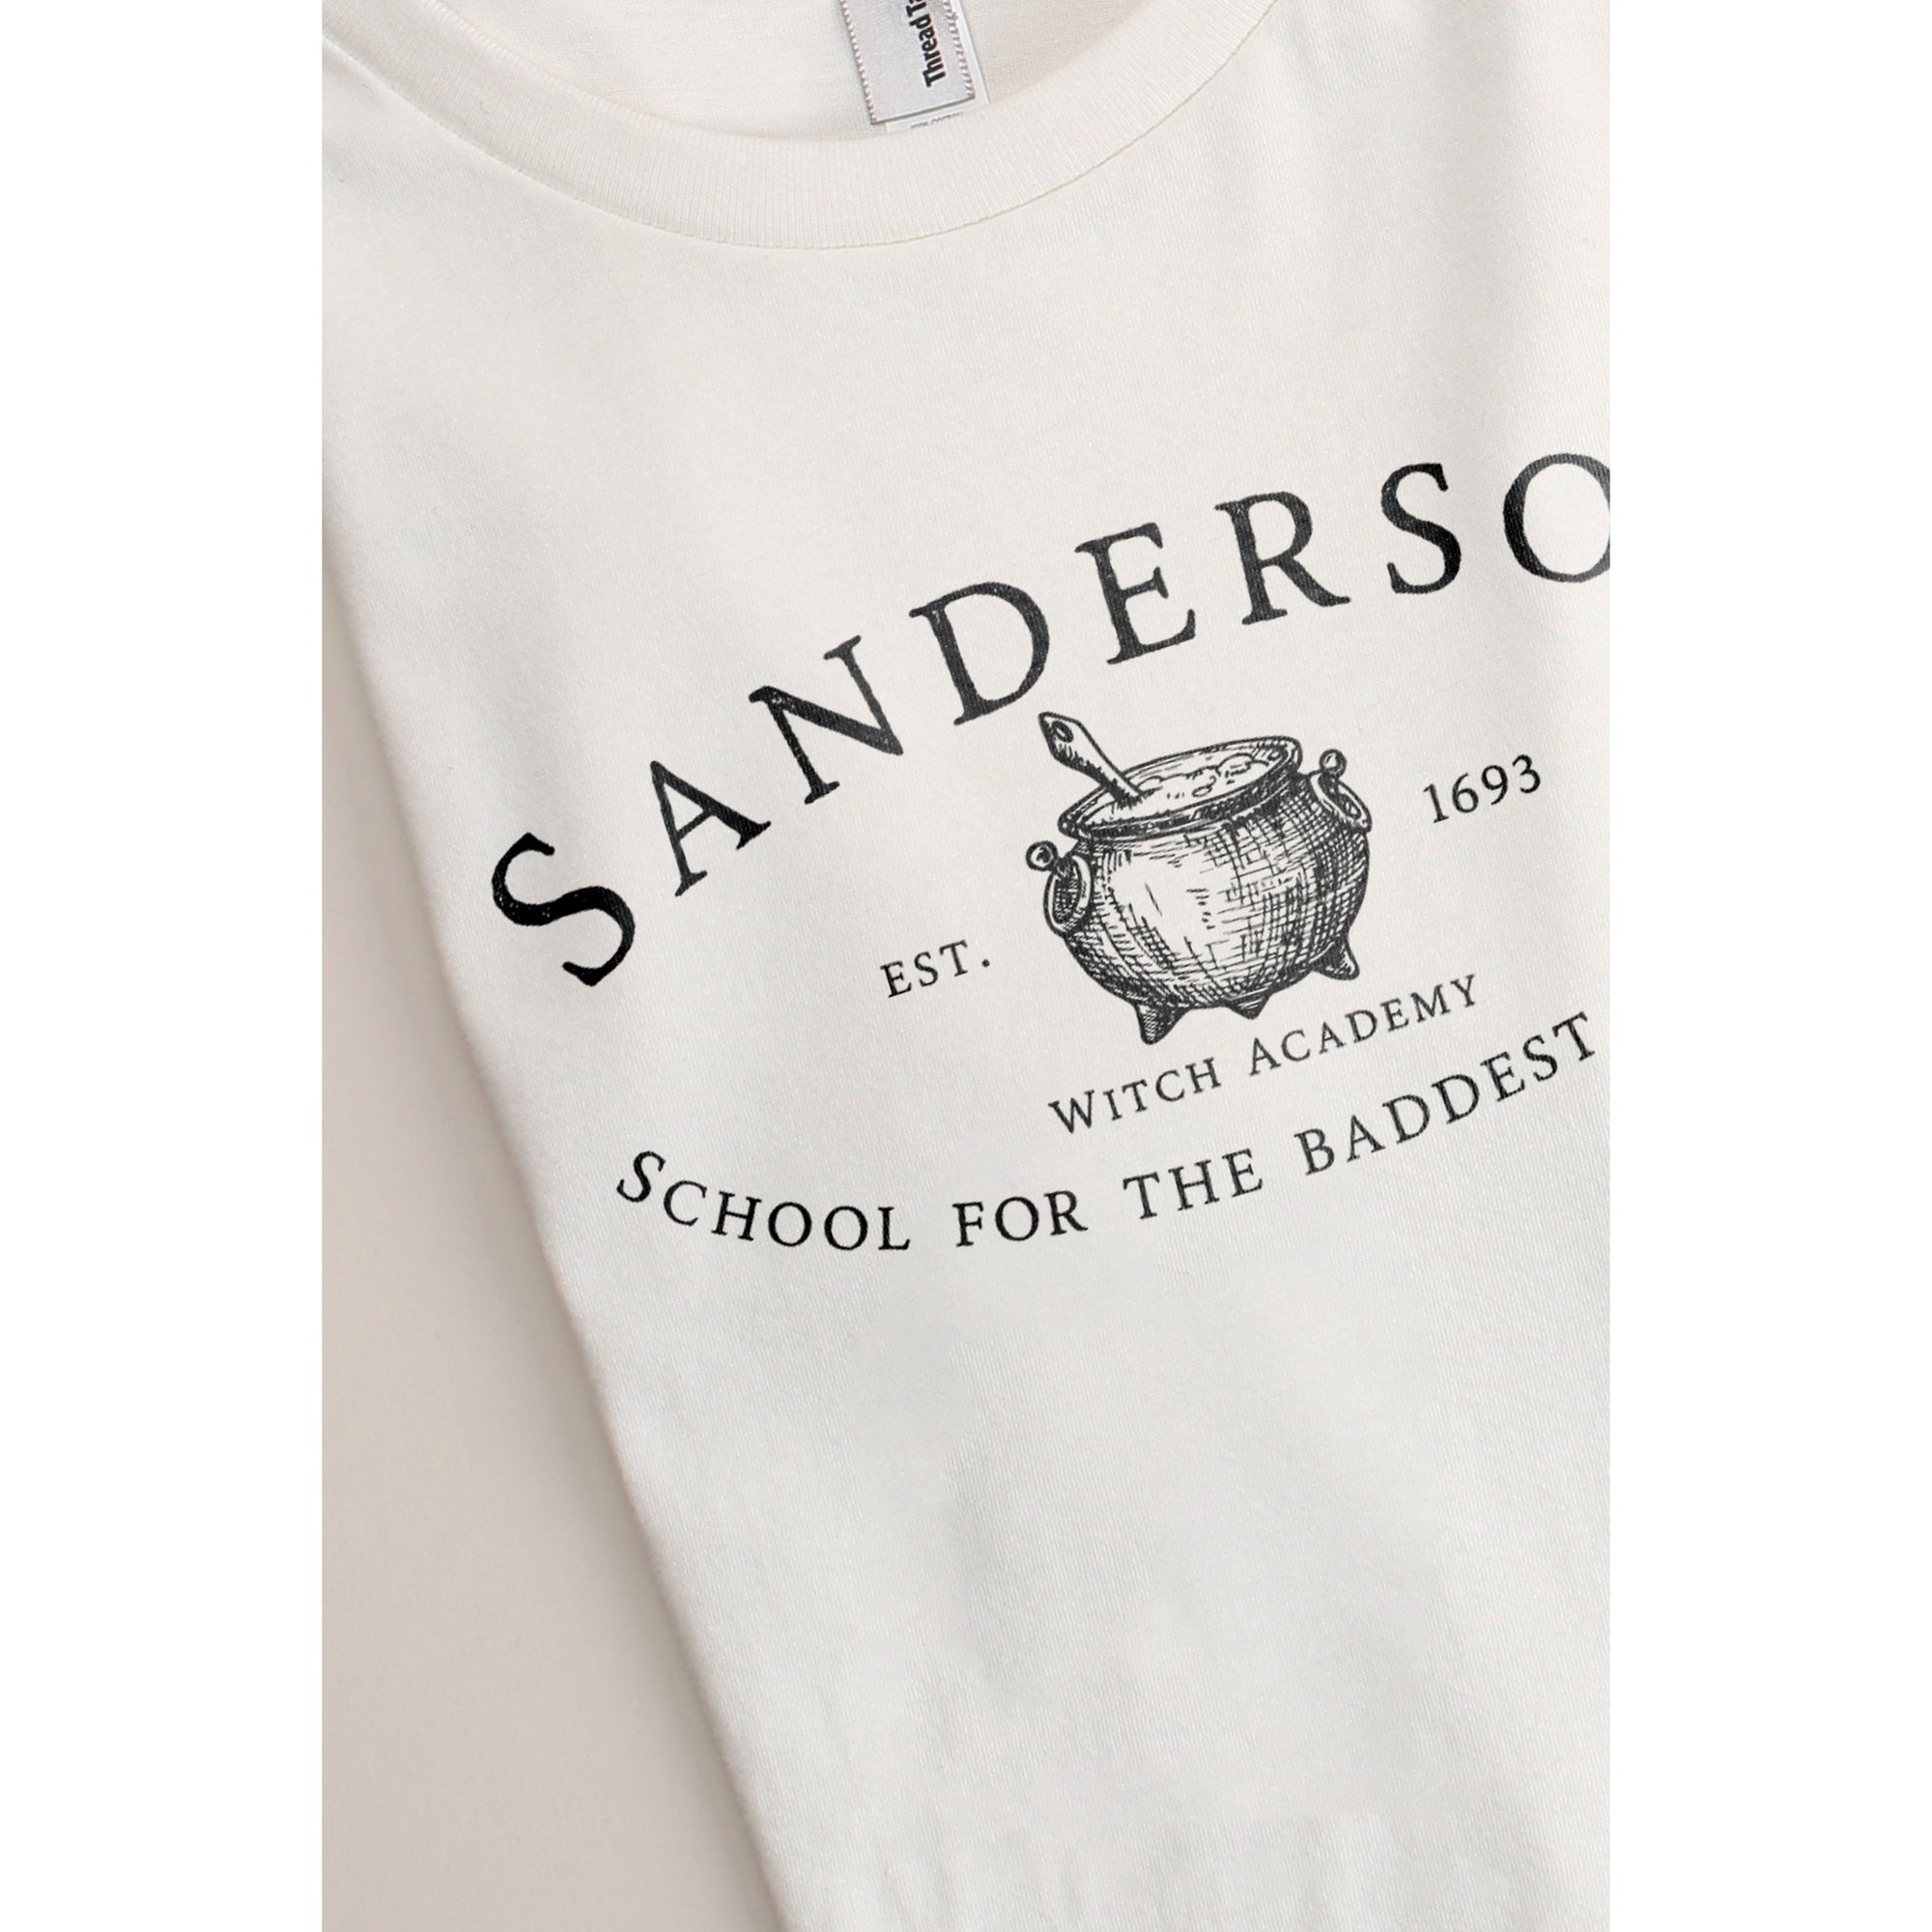 Sanderson Witch Academy - thread tank | Stories you can wear.